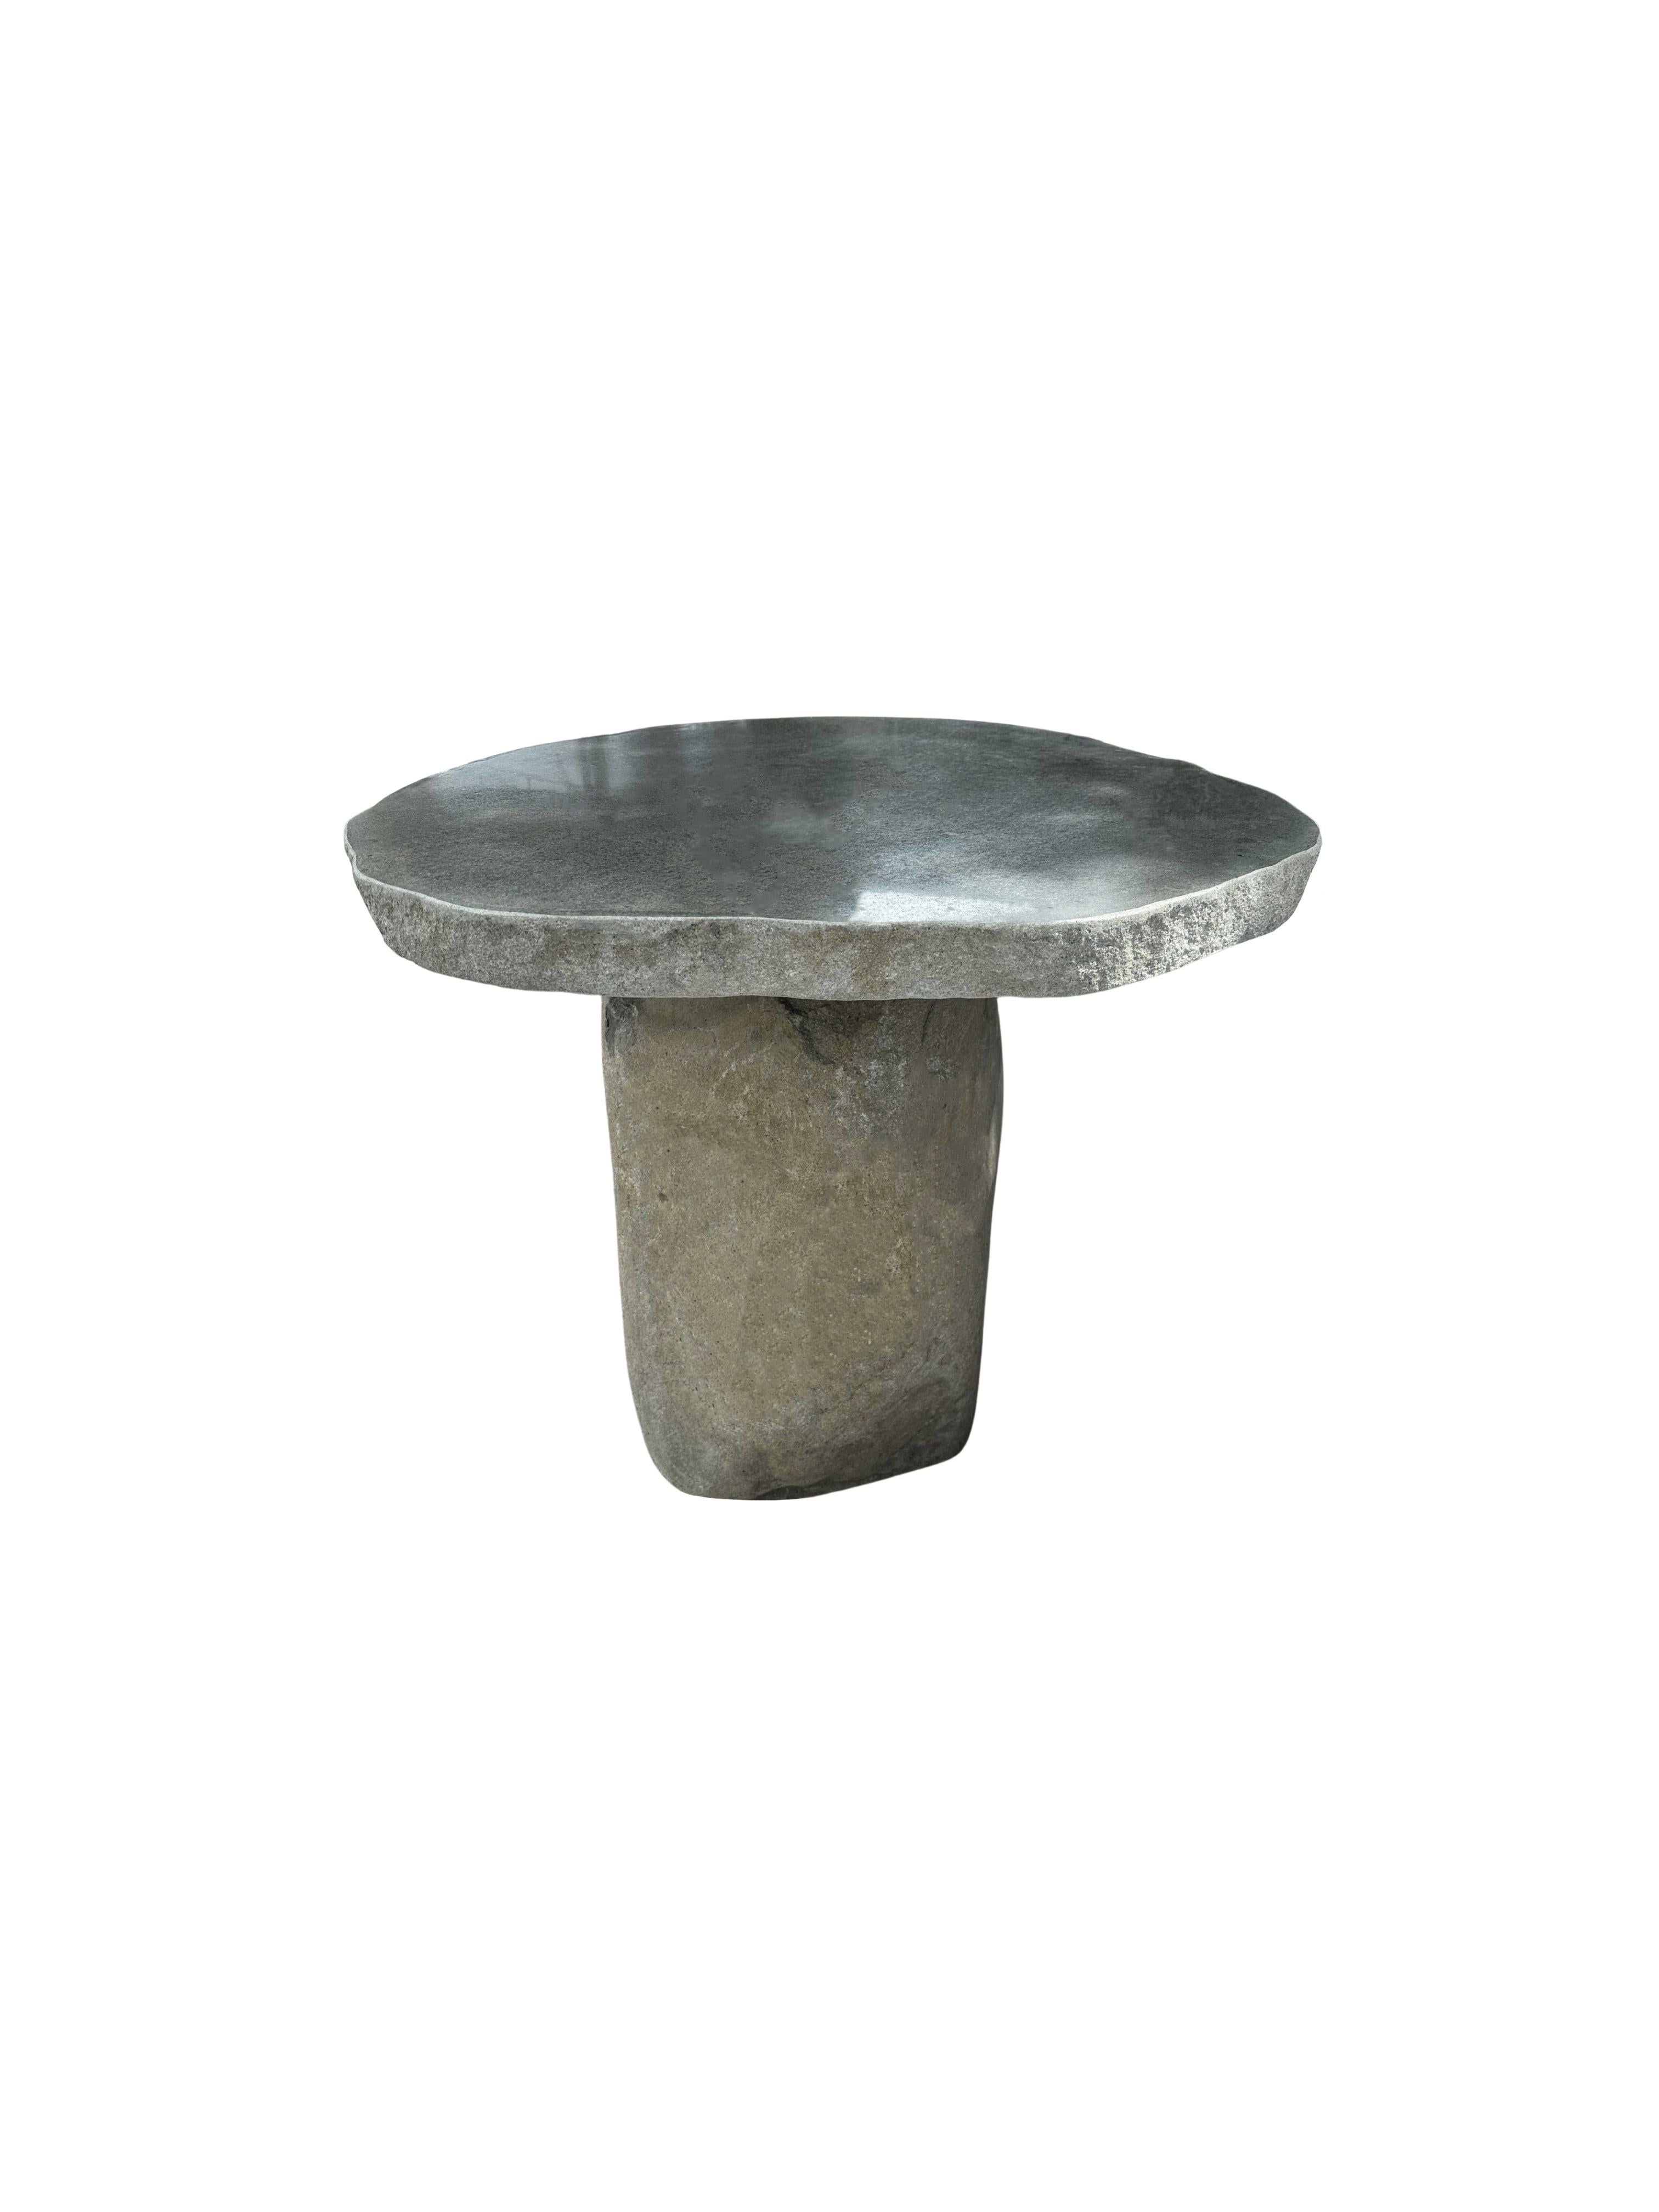 Organic Modern Solid Stone Round Table from Java, Indonesia